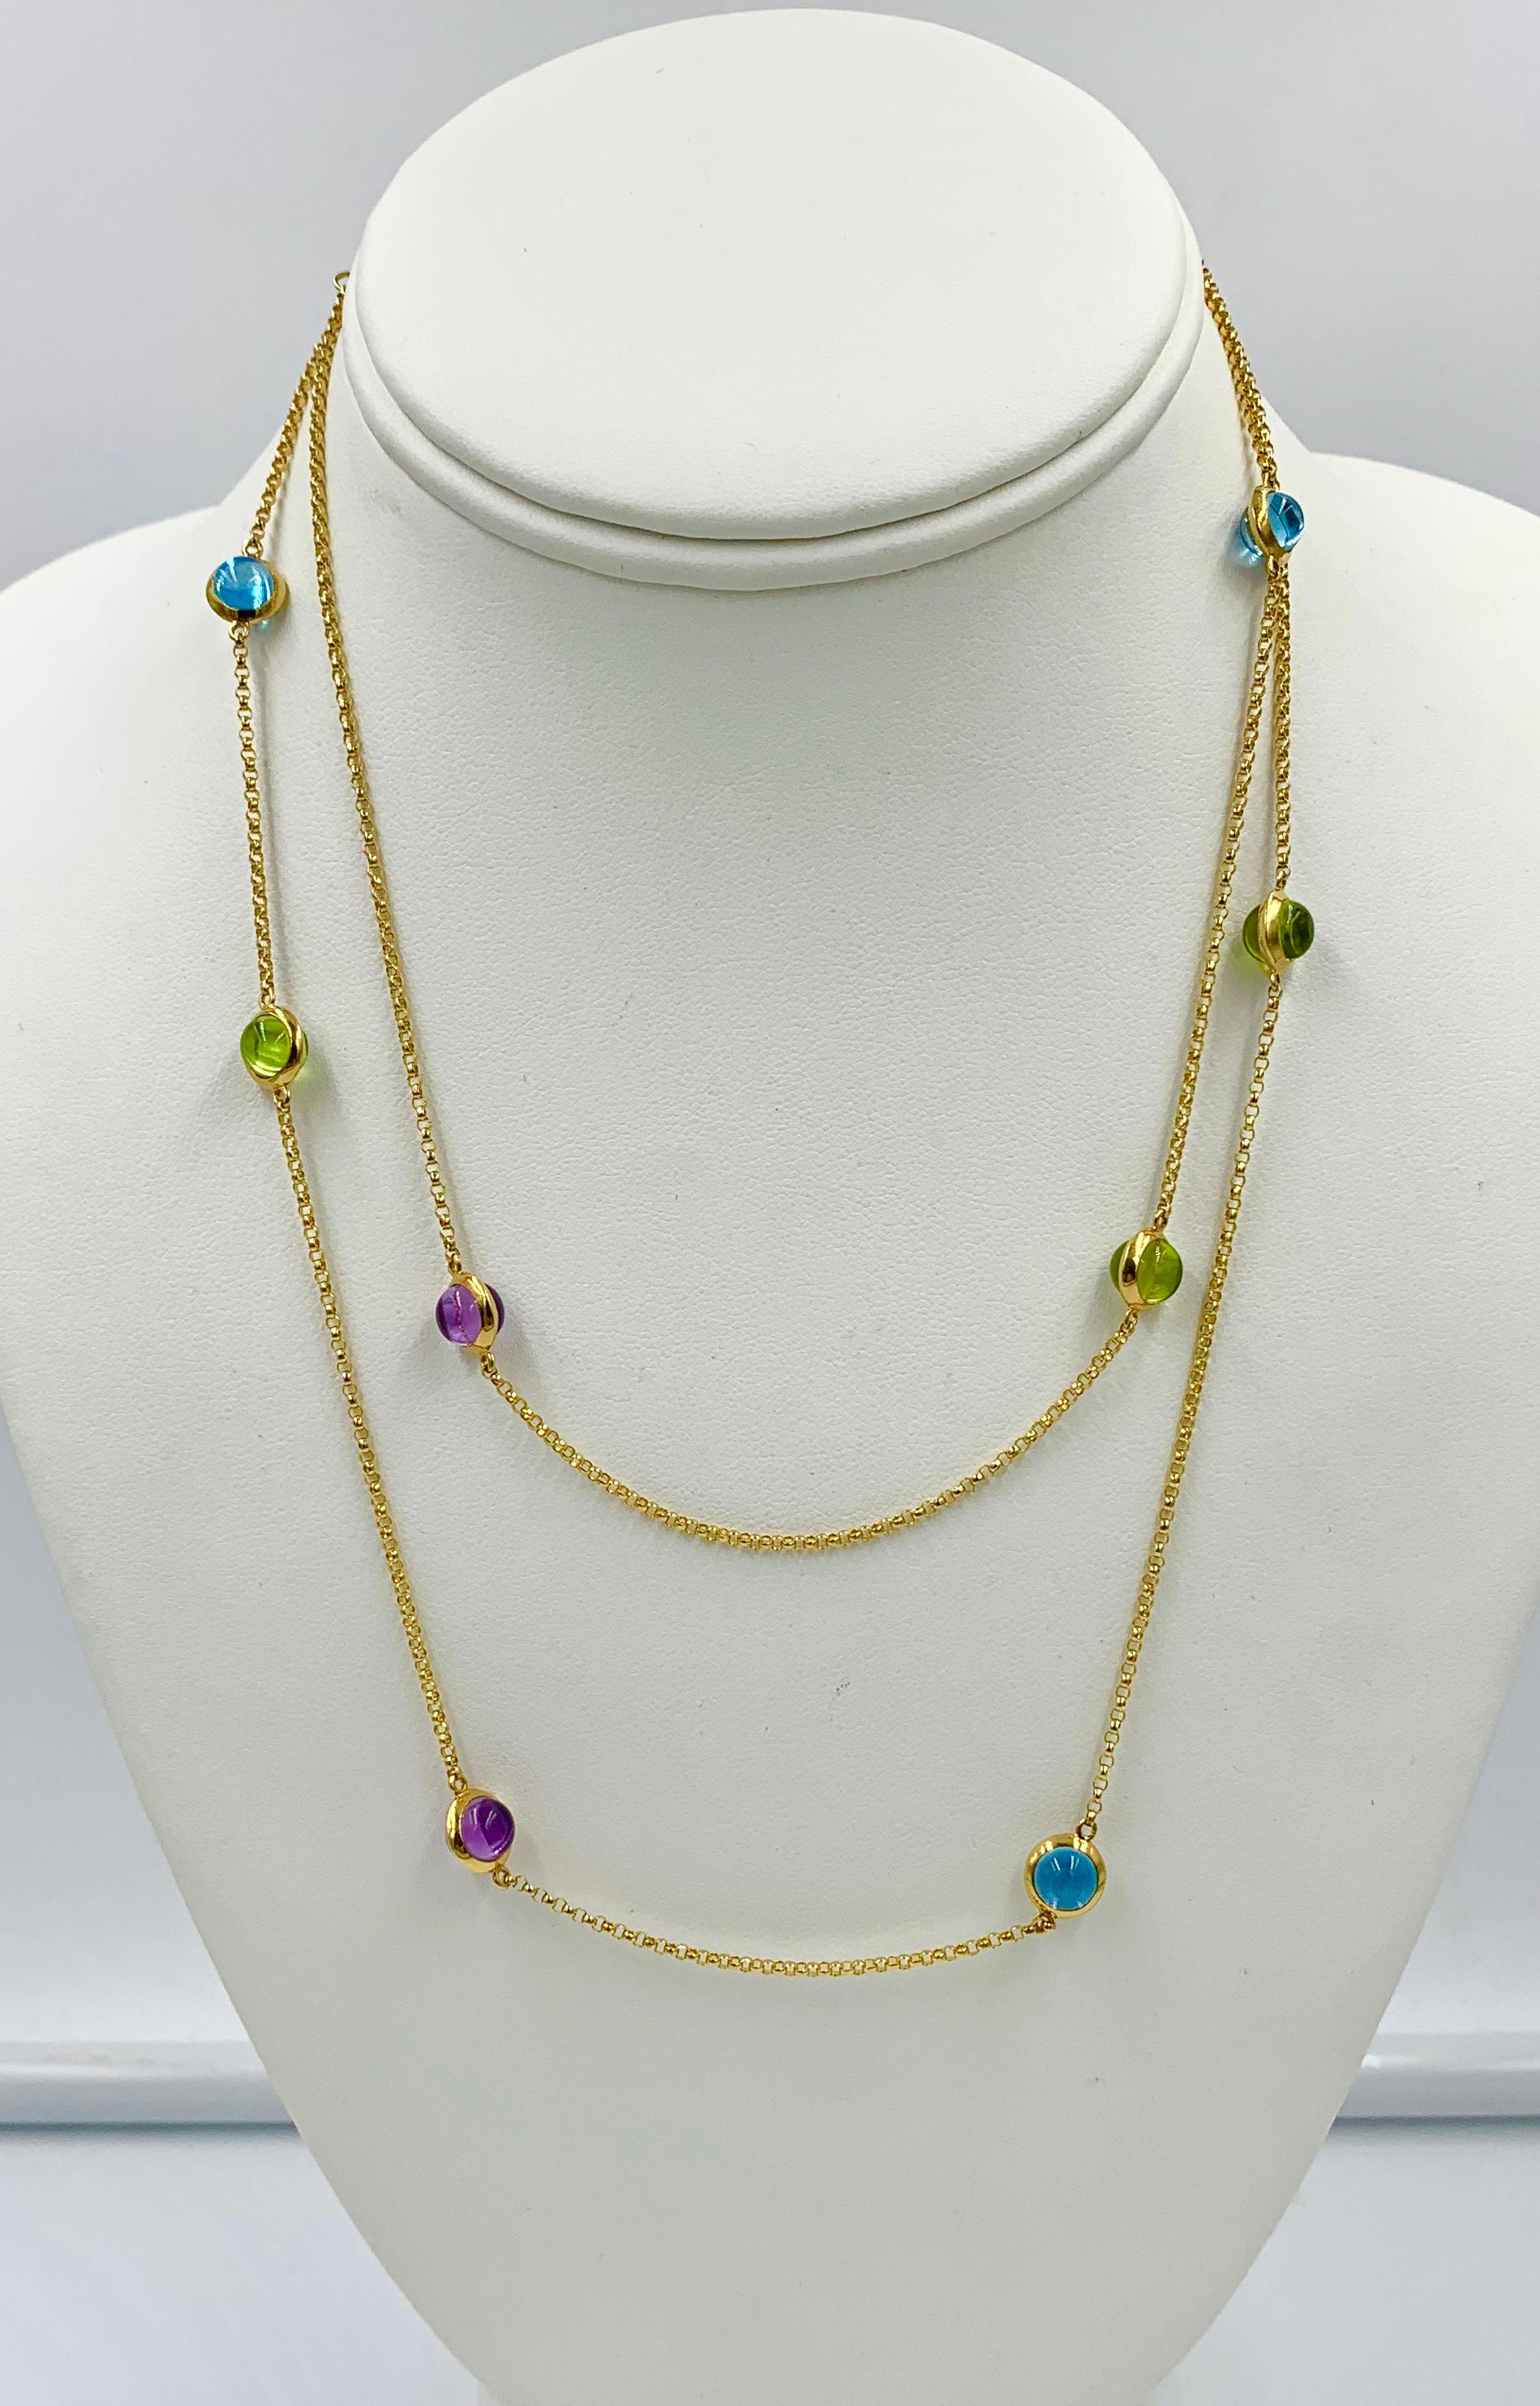 We are so delighted to have the iconic GEORG JENSEN Moonrise Sautoir Necklace in 18 Karat Yellow Gold with Topaz, Peridot and Amethyst gems in a diamonds by the yard design.  The very rare original Georg Jensen necklace was designed by David Chu for